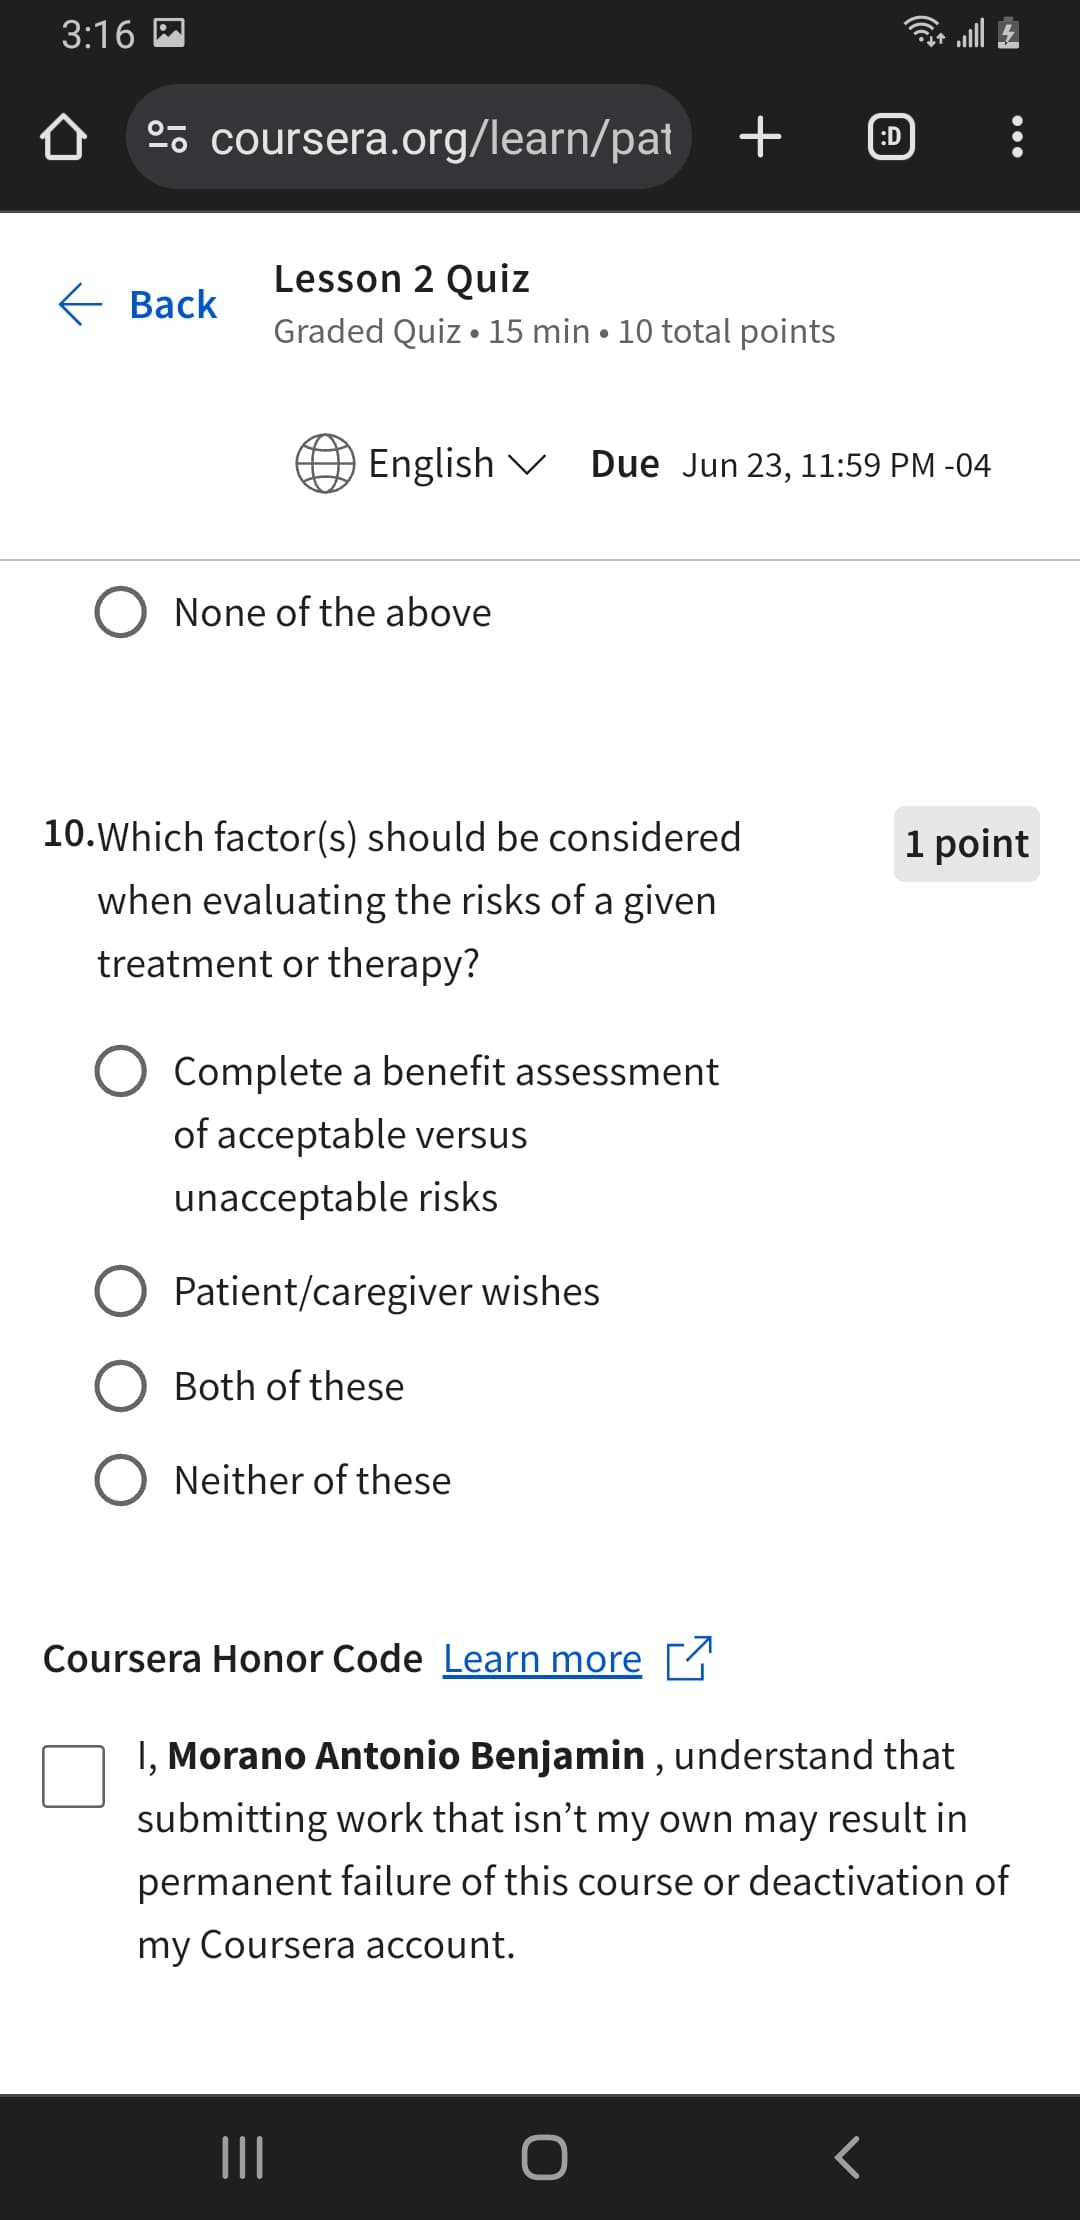 3:16
º coursera.org/learn/pat + ℗
Lesson 2 Quiz
Back
.
Graded Quiz 15 min 10 total points
English
Due Jun 23, 11:59 PM -04
None of the above
10. Which factor(s) should be considered
when evaluating the risks of a given
treatment or therapy?
Complete a benefit assessment
of acceptable versus
unacceptable risks
Patient/caregiver wishes
Both of these
Neither of these
1 point
Coursera Honor Code Learn more
I, Morano Antonio Benjamin, understand that
submitting work that isn't my own may result in
permanent failure of this course or deactivation of
my Coursera account.
|||
O
<